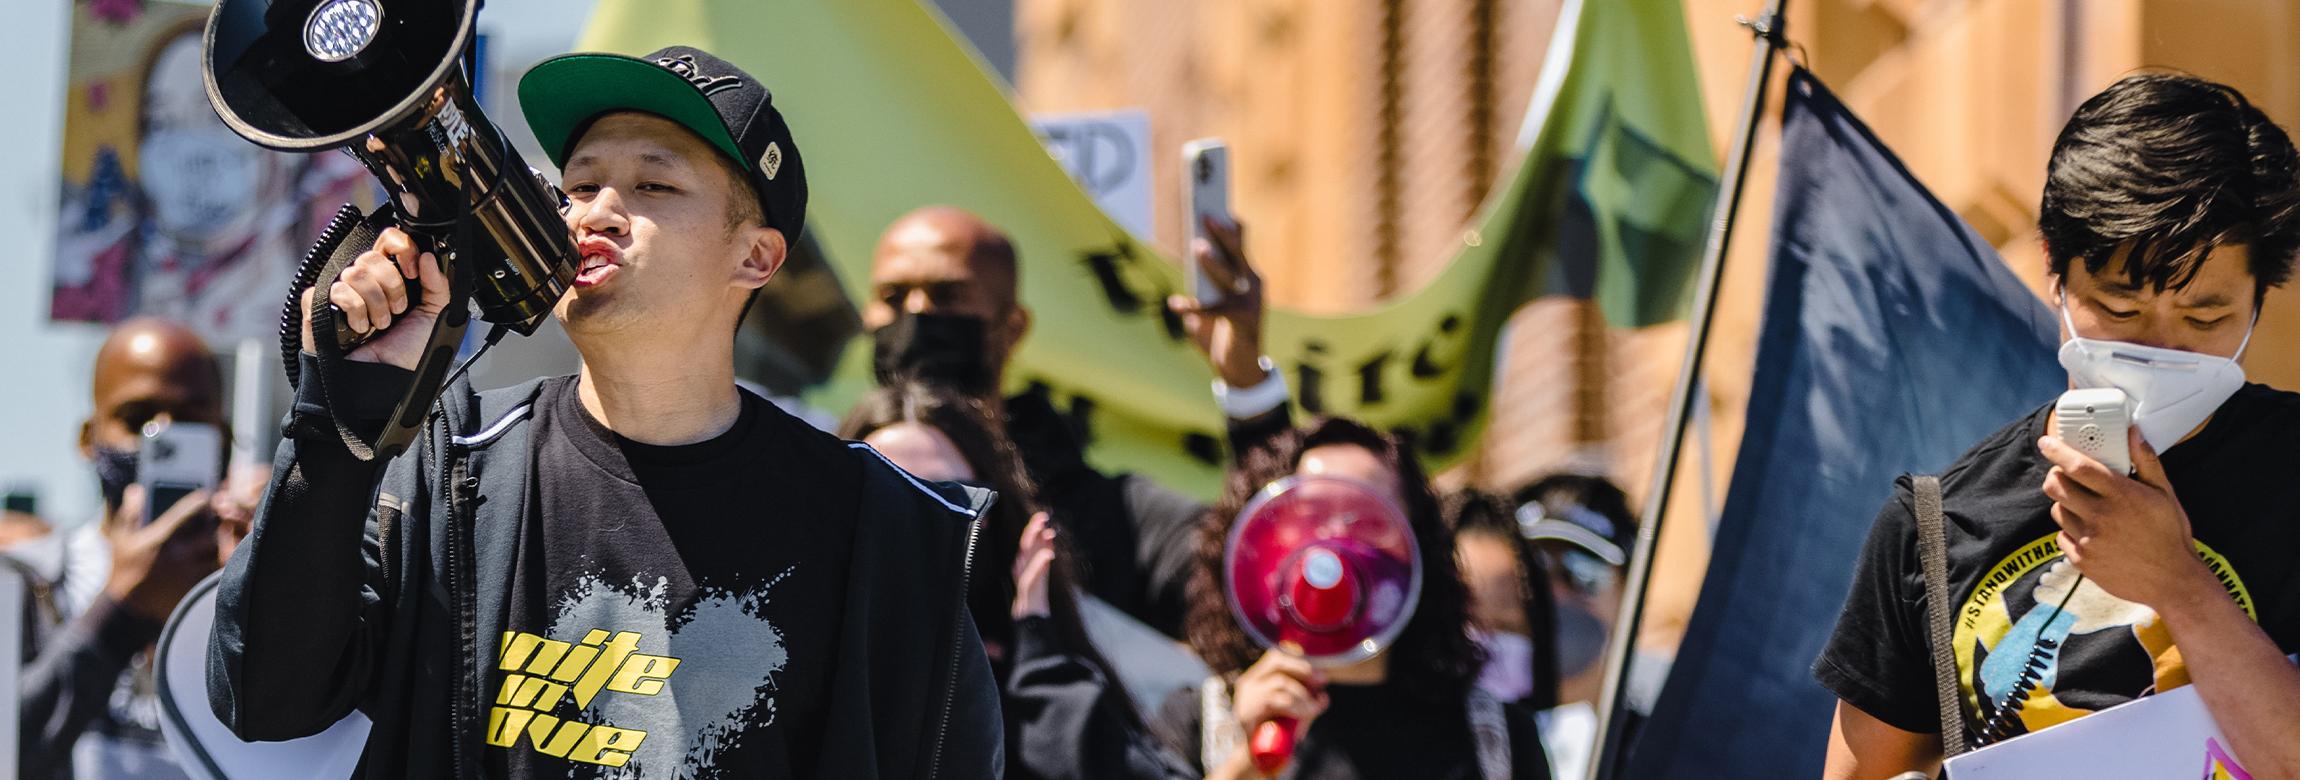 An Asian man chants into a bullhorn at the head of a demonstration against anti-Asian hate. A crowd holding banners follow him.